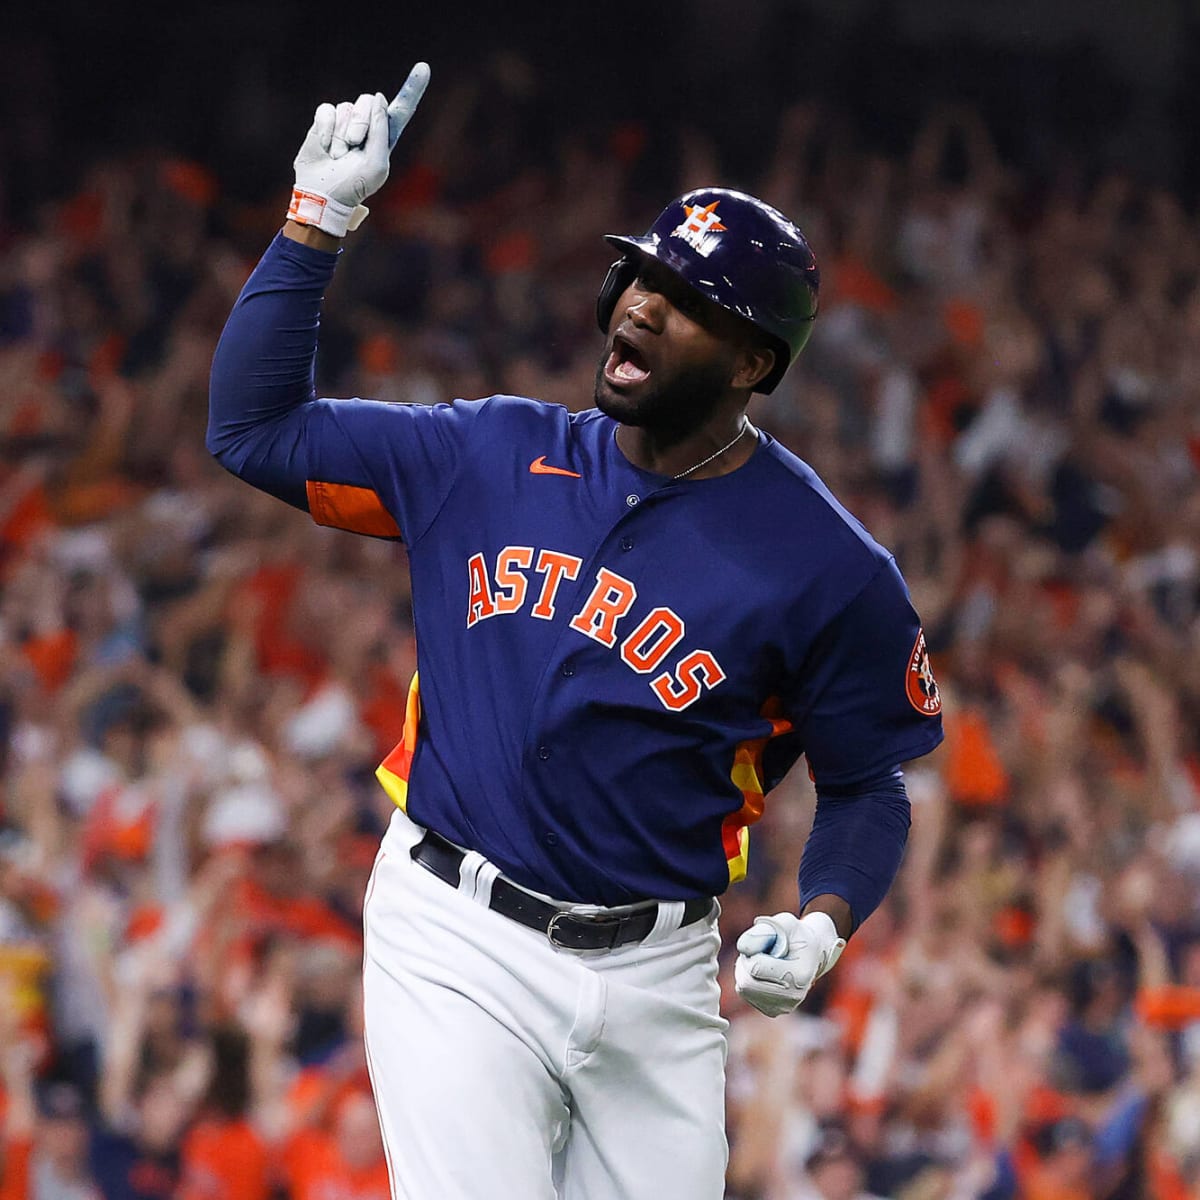 Yordan Alvarez makes it a whole new ballgame for the @Astros with his 100th  career HR!